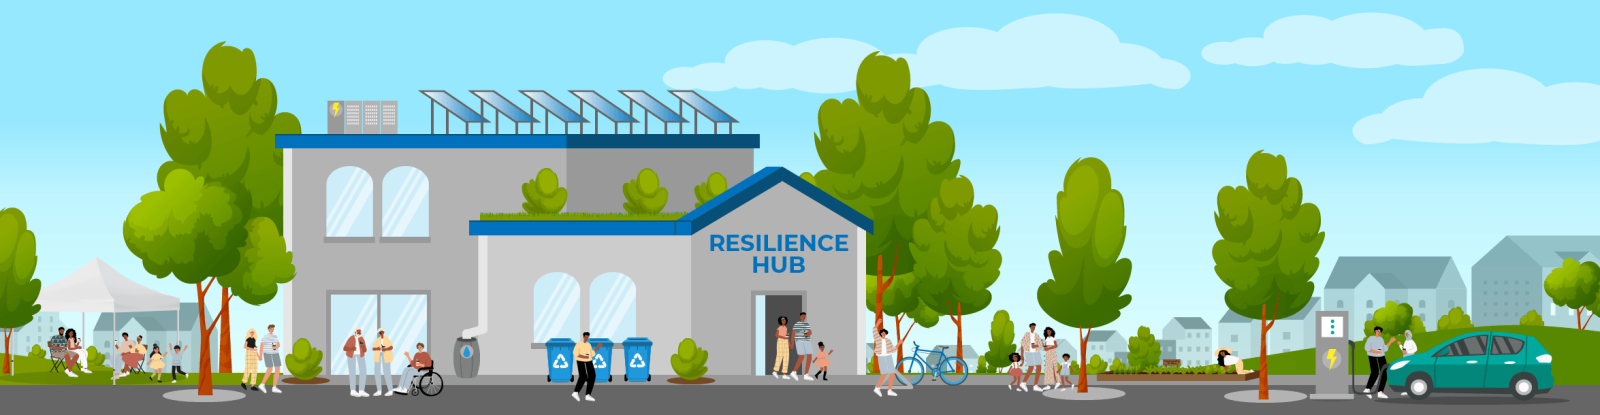 Graphic Image of a buidling that is a Resilience Hub with solar panels, green roof, trees, recycling containers, people, a car charging port, gardens and a playground